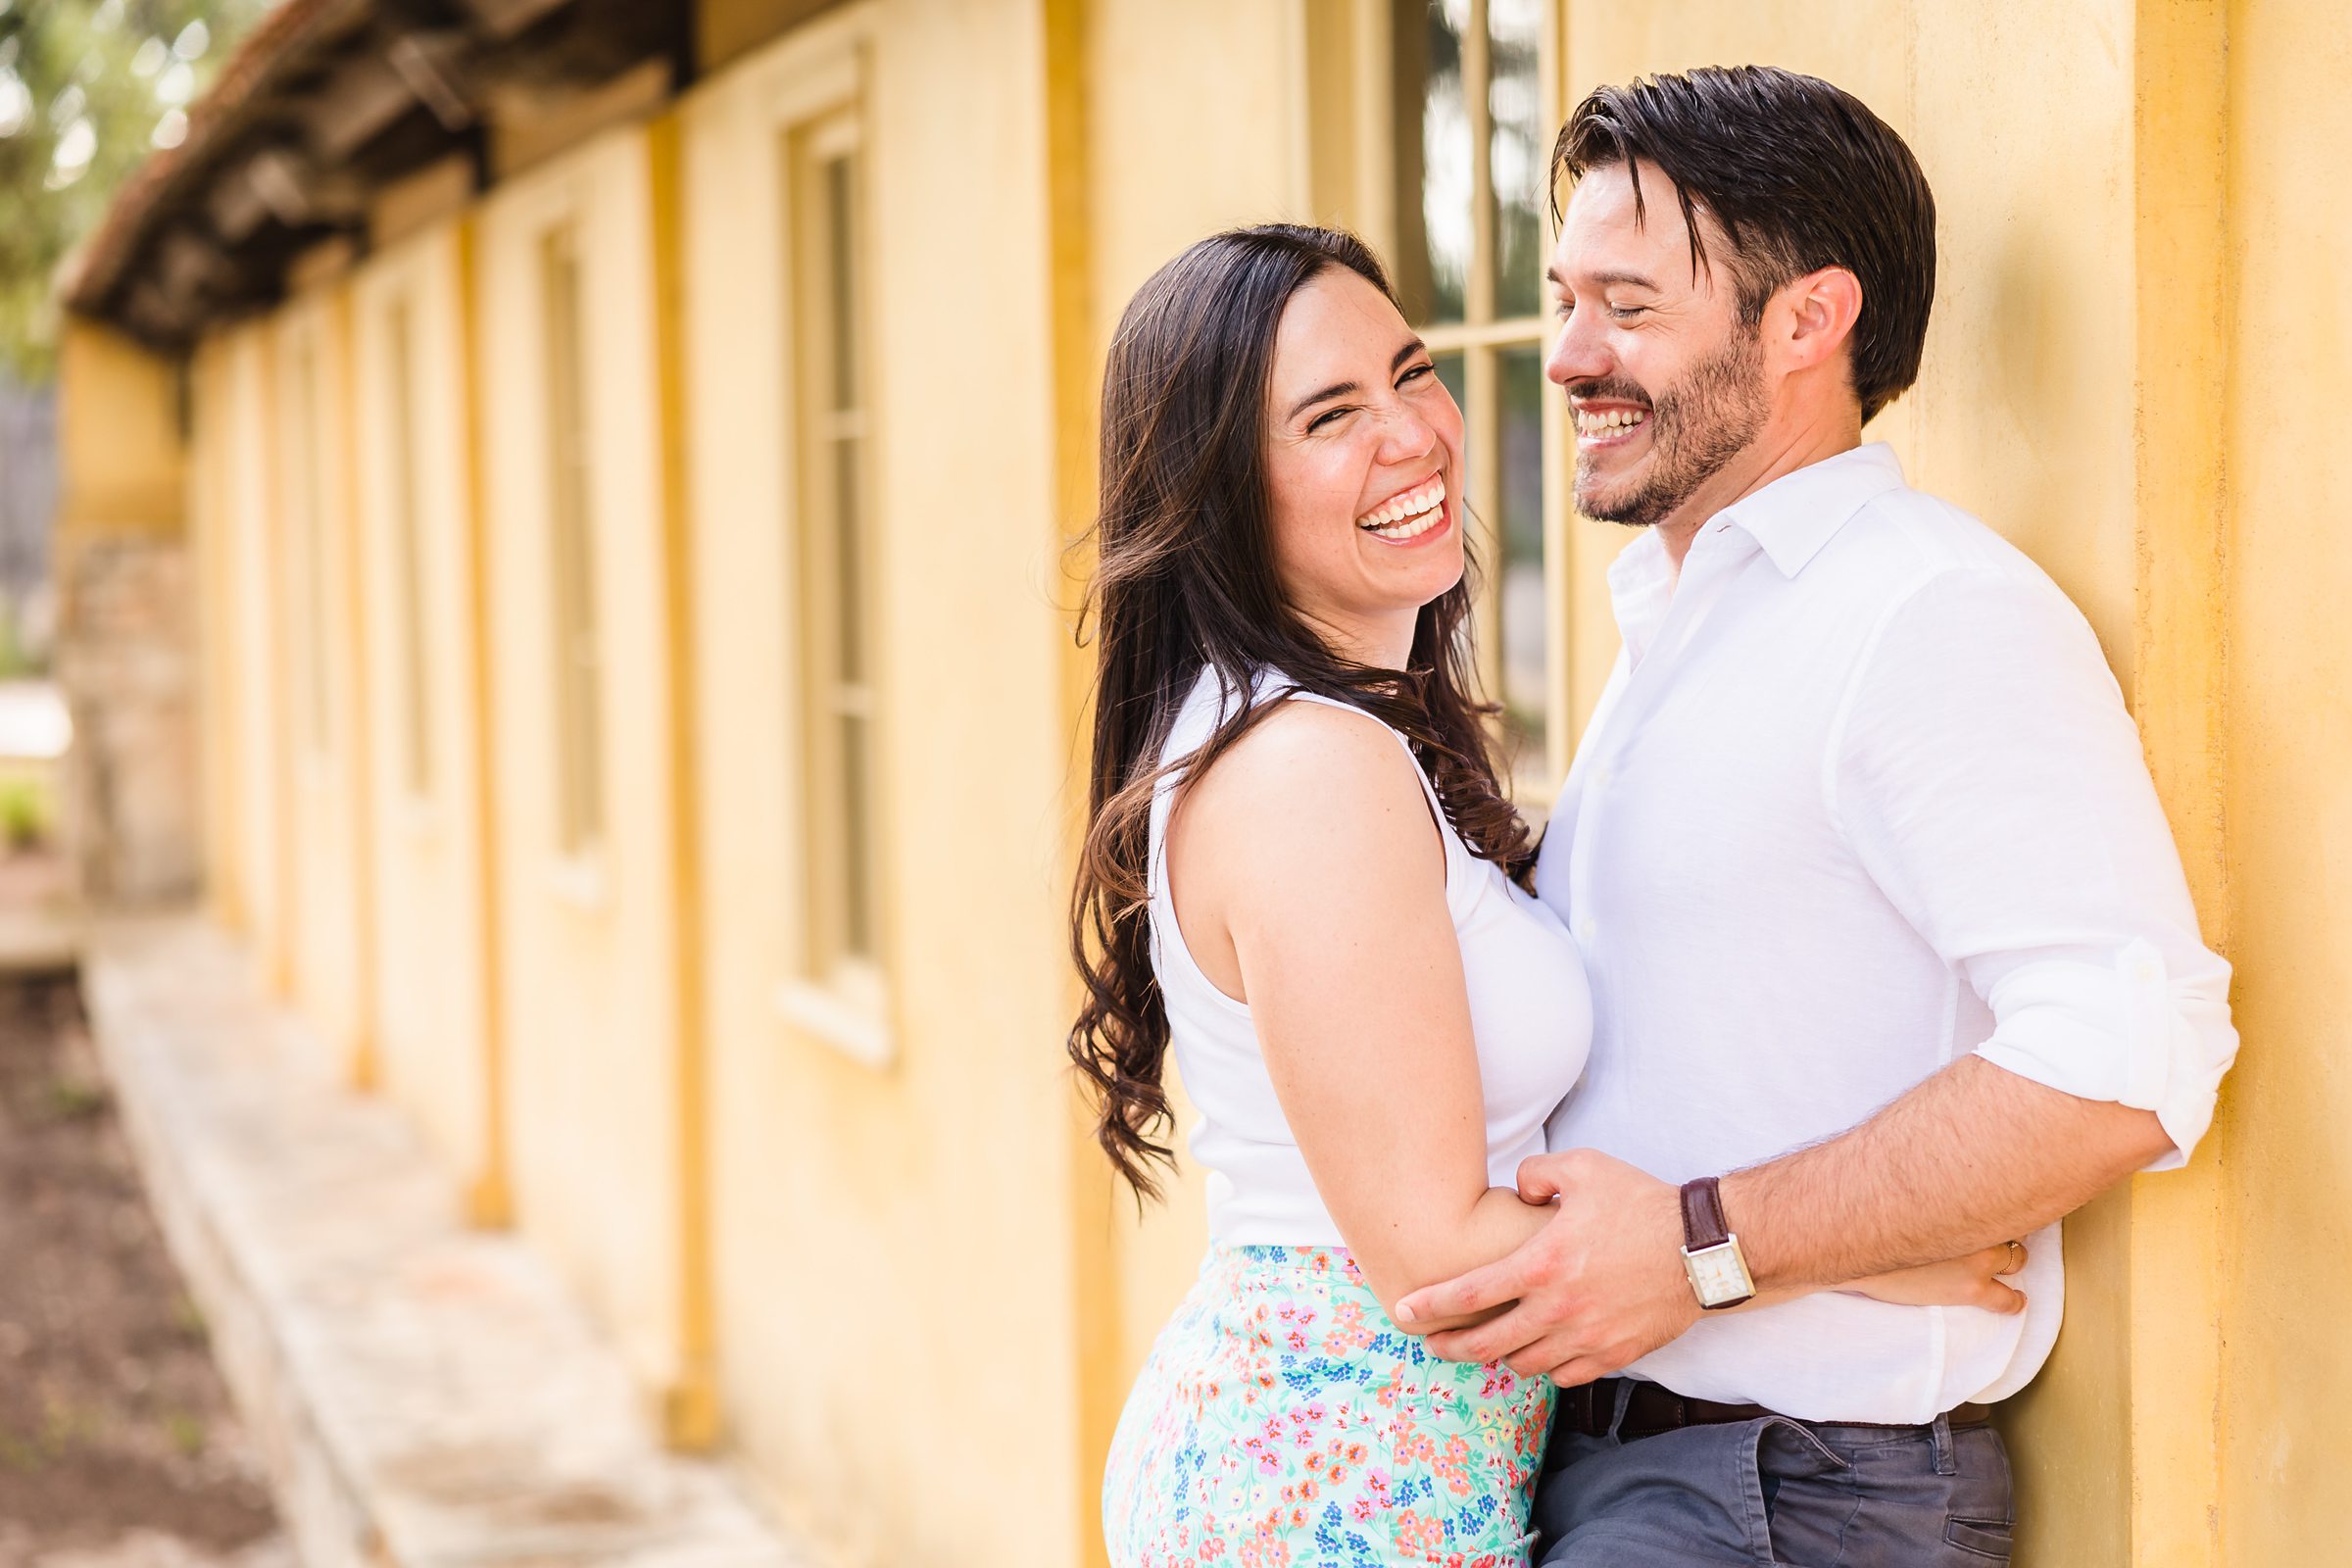 Couple celebrate their engagement at the Camp Lucy wedding venue in Dripping Springs, Texas.